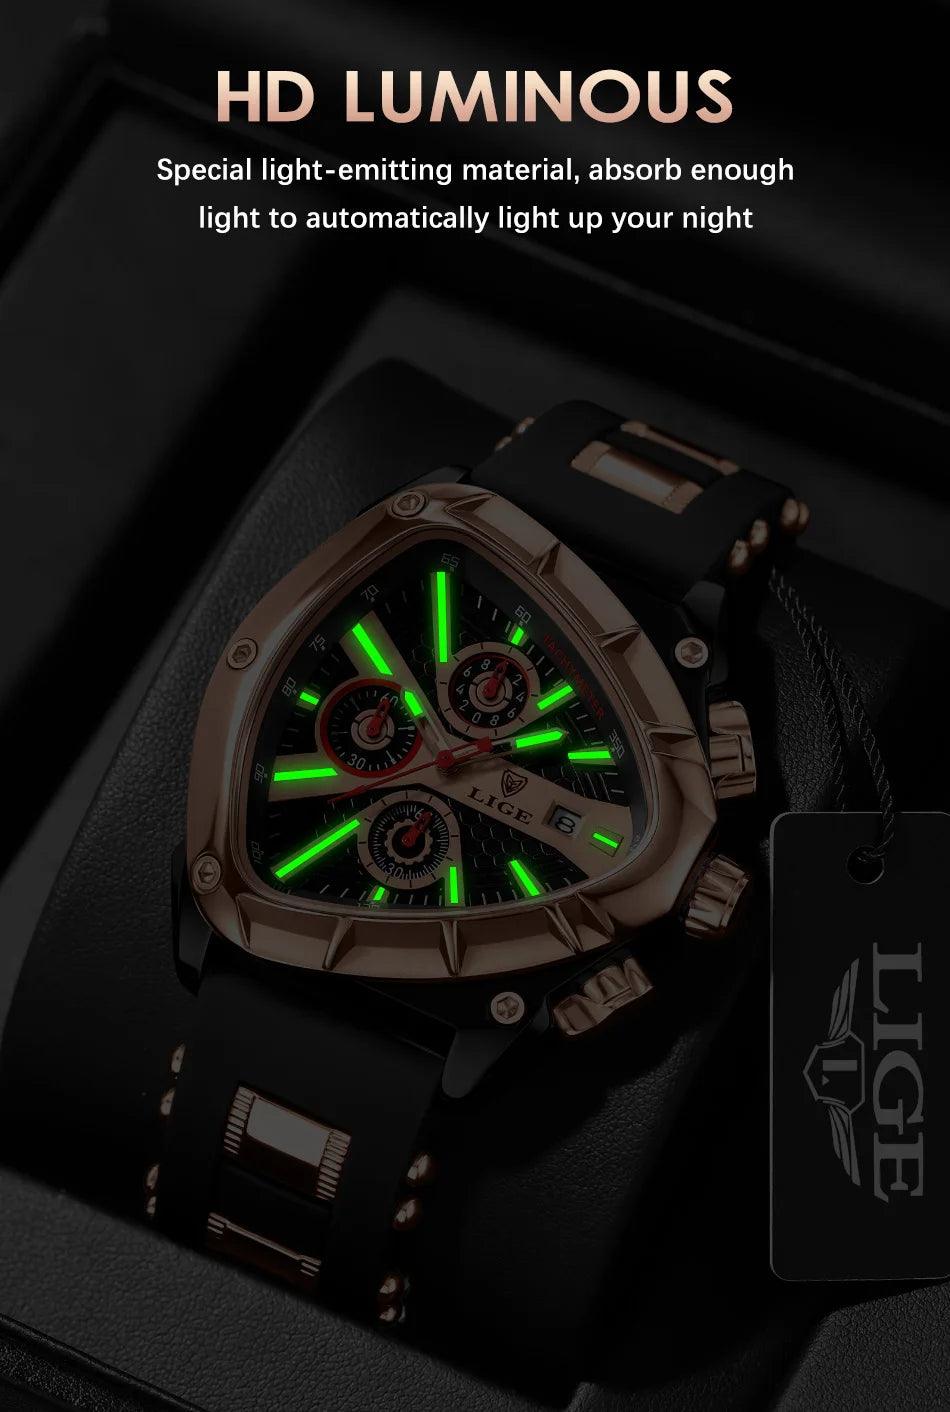 Top Brand Luxury Fashion Hipster Watches - Casual Military Quartz Chronograph Waterproof Watches For Men - The Jewellery Supermarket